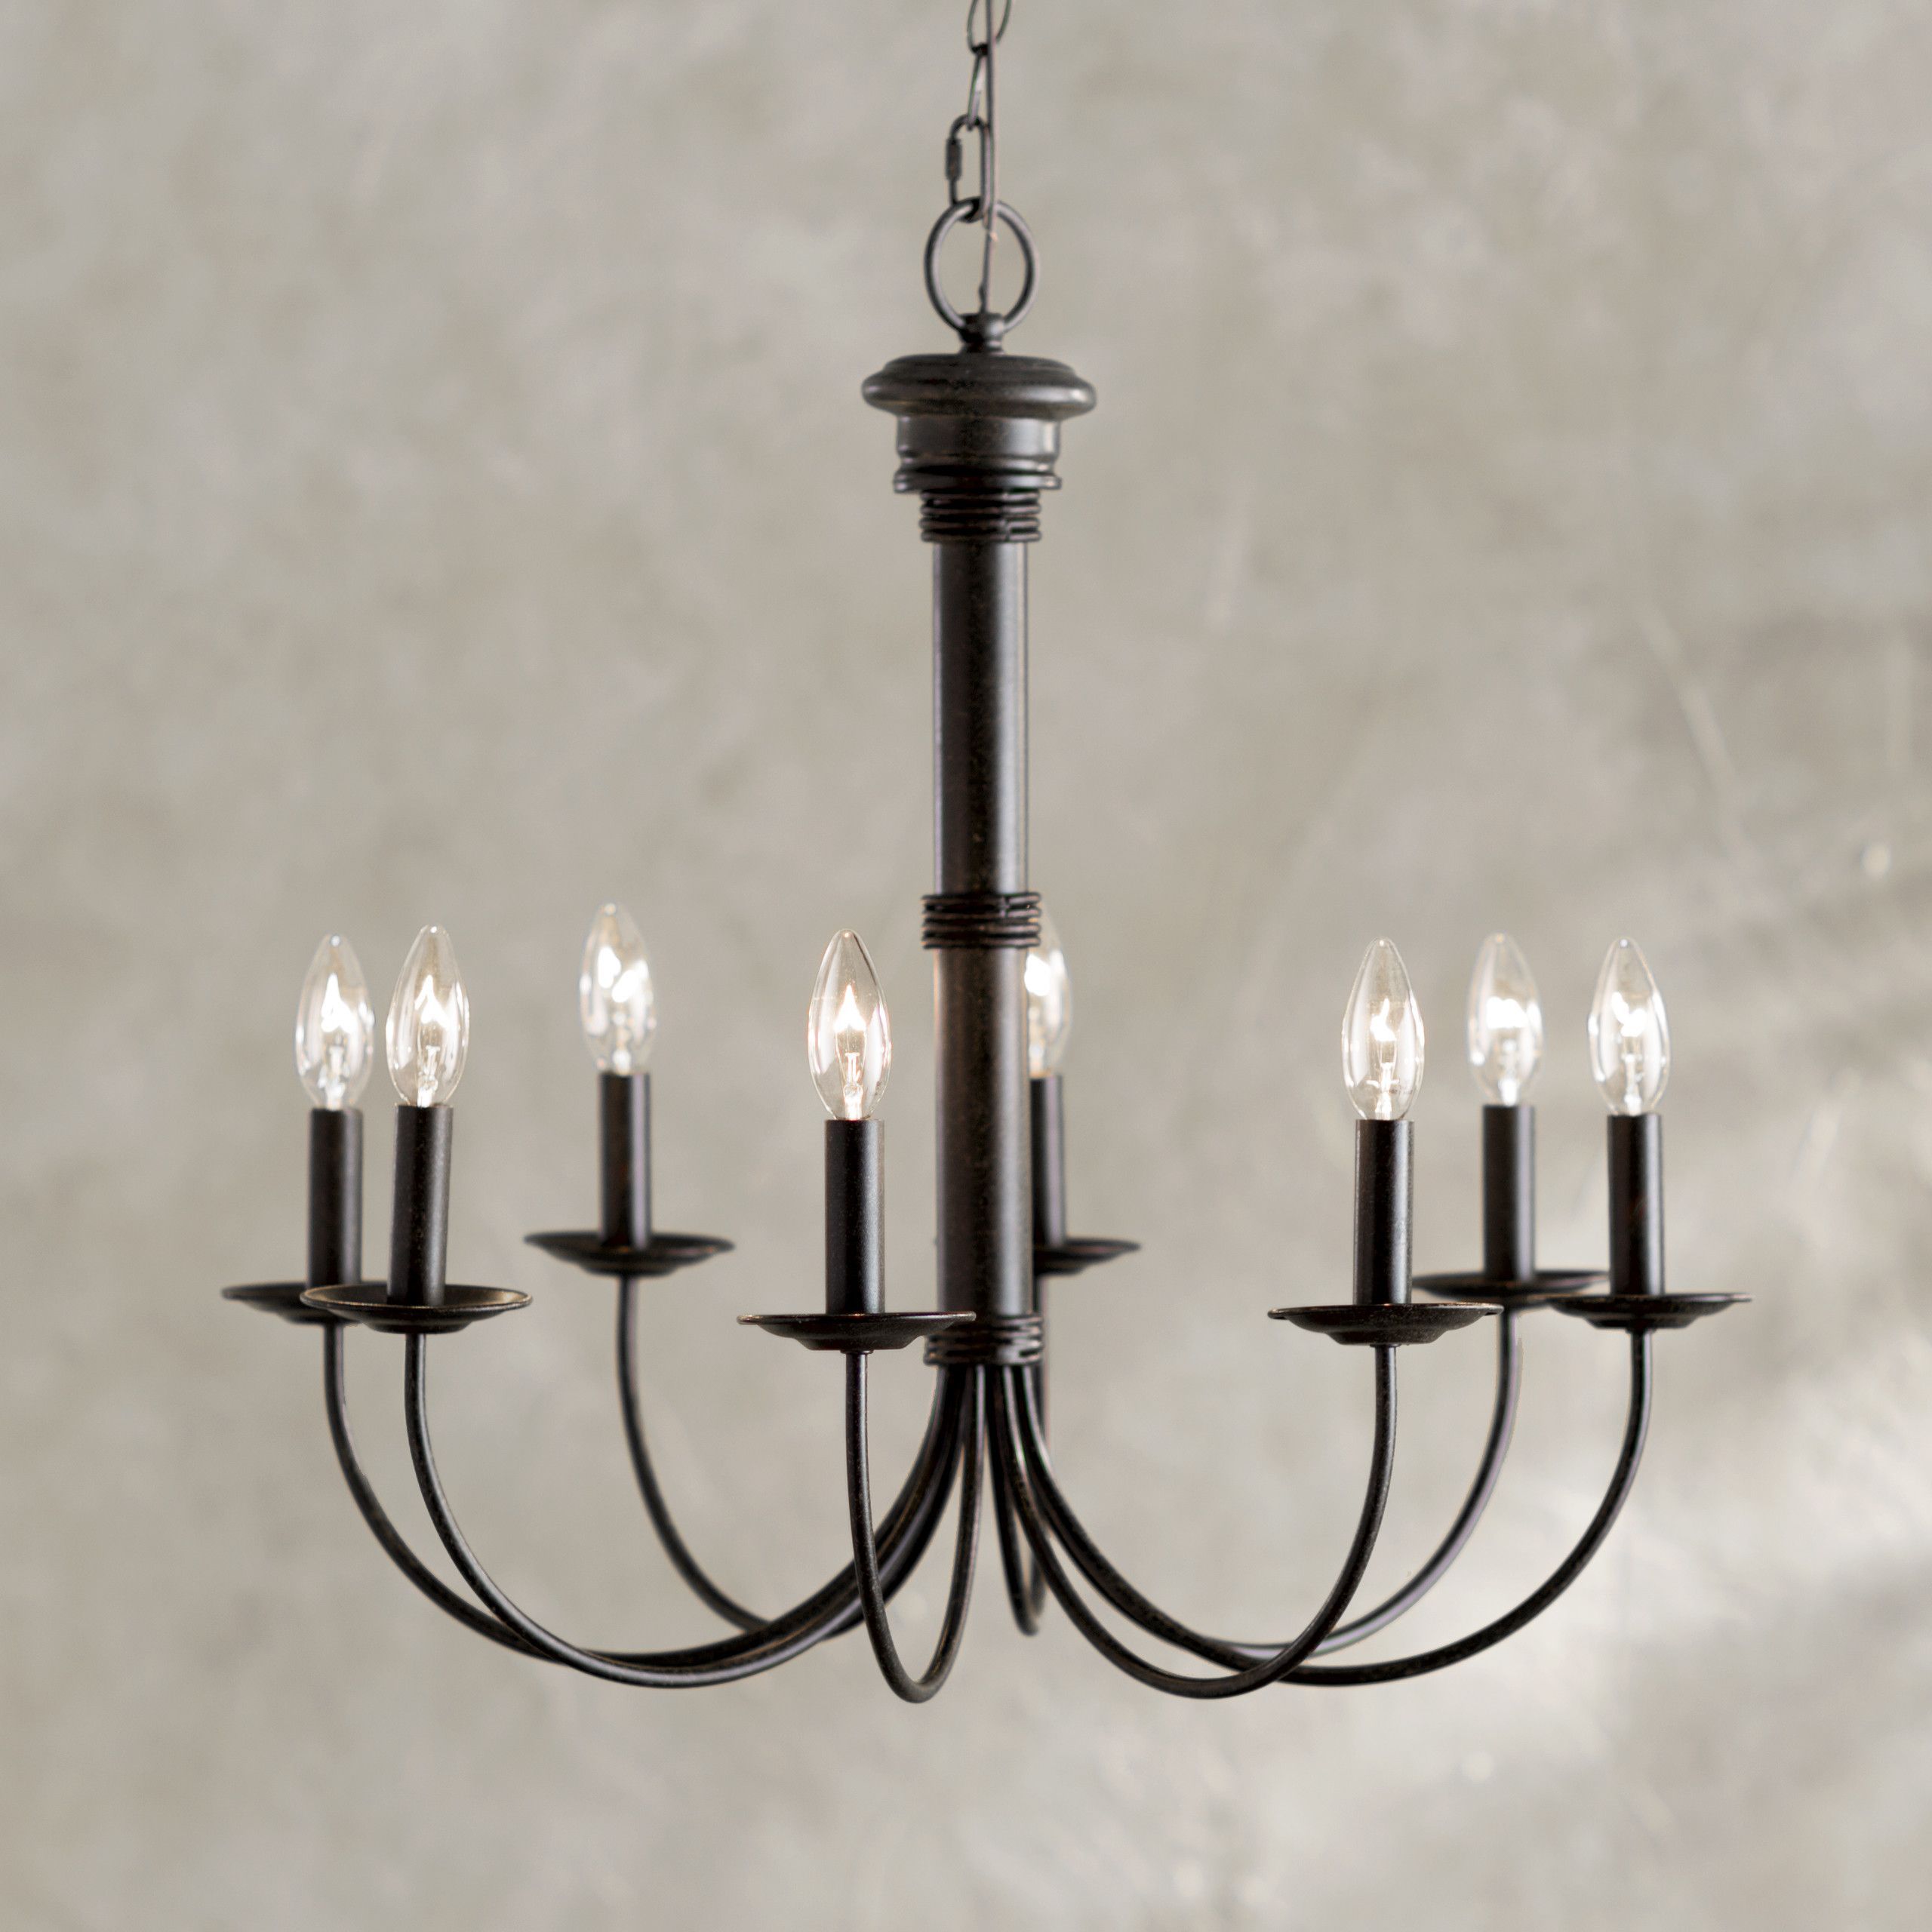 Savoie 8 Light Chandelier | Lighting Ideas | Dining Throughout Shaylee 5 Light Candle Style Chandeliers (View 20 of 30)